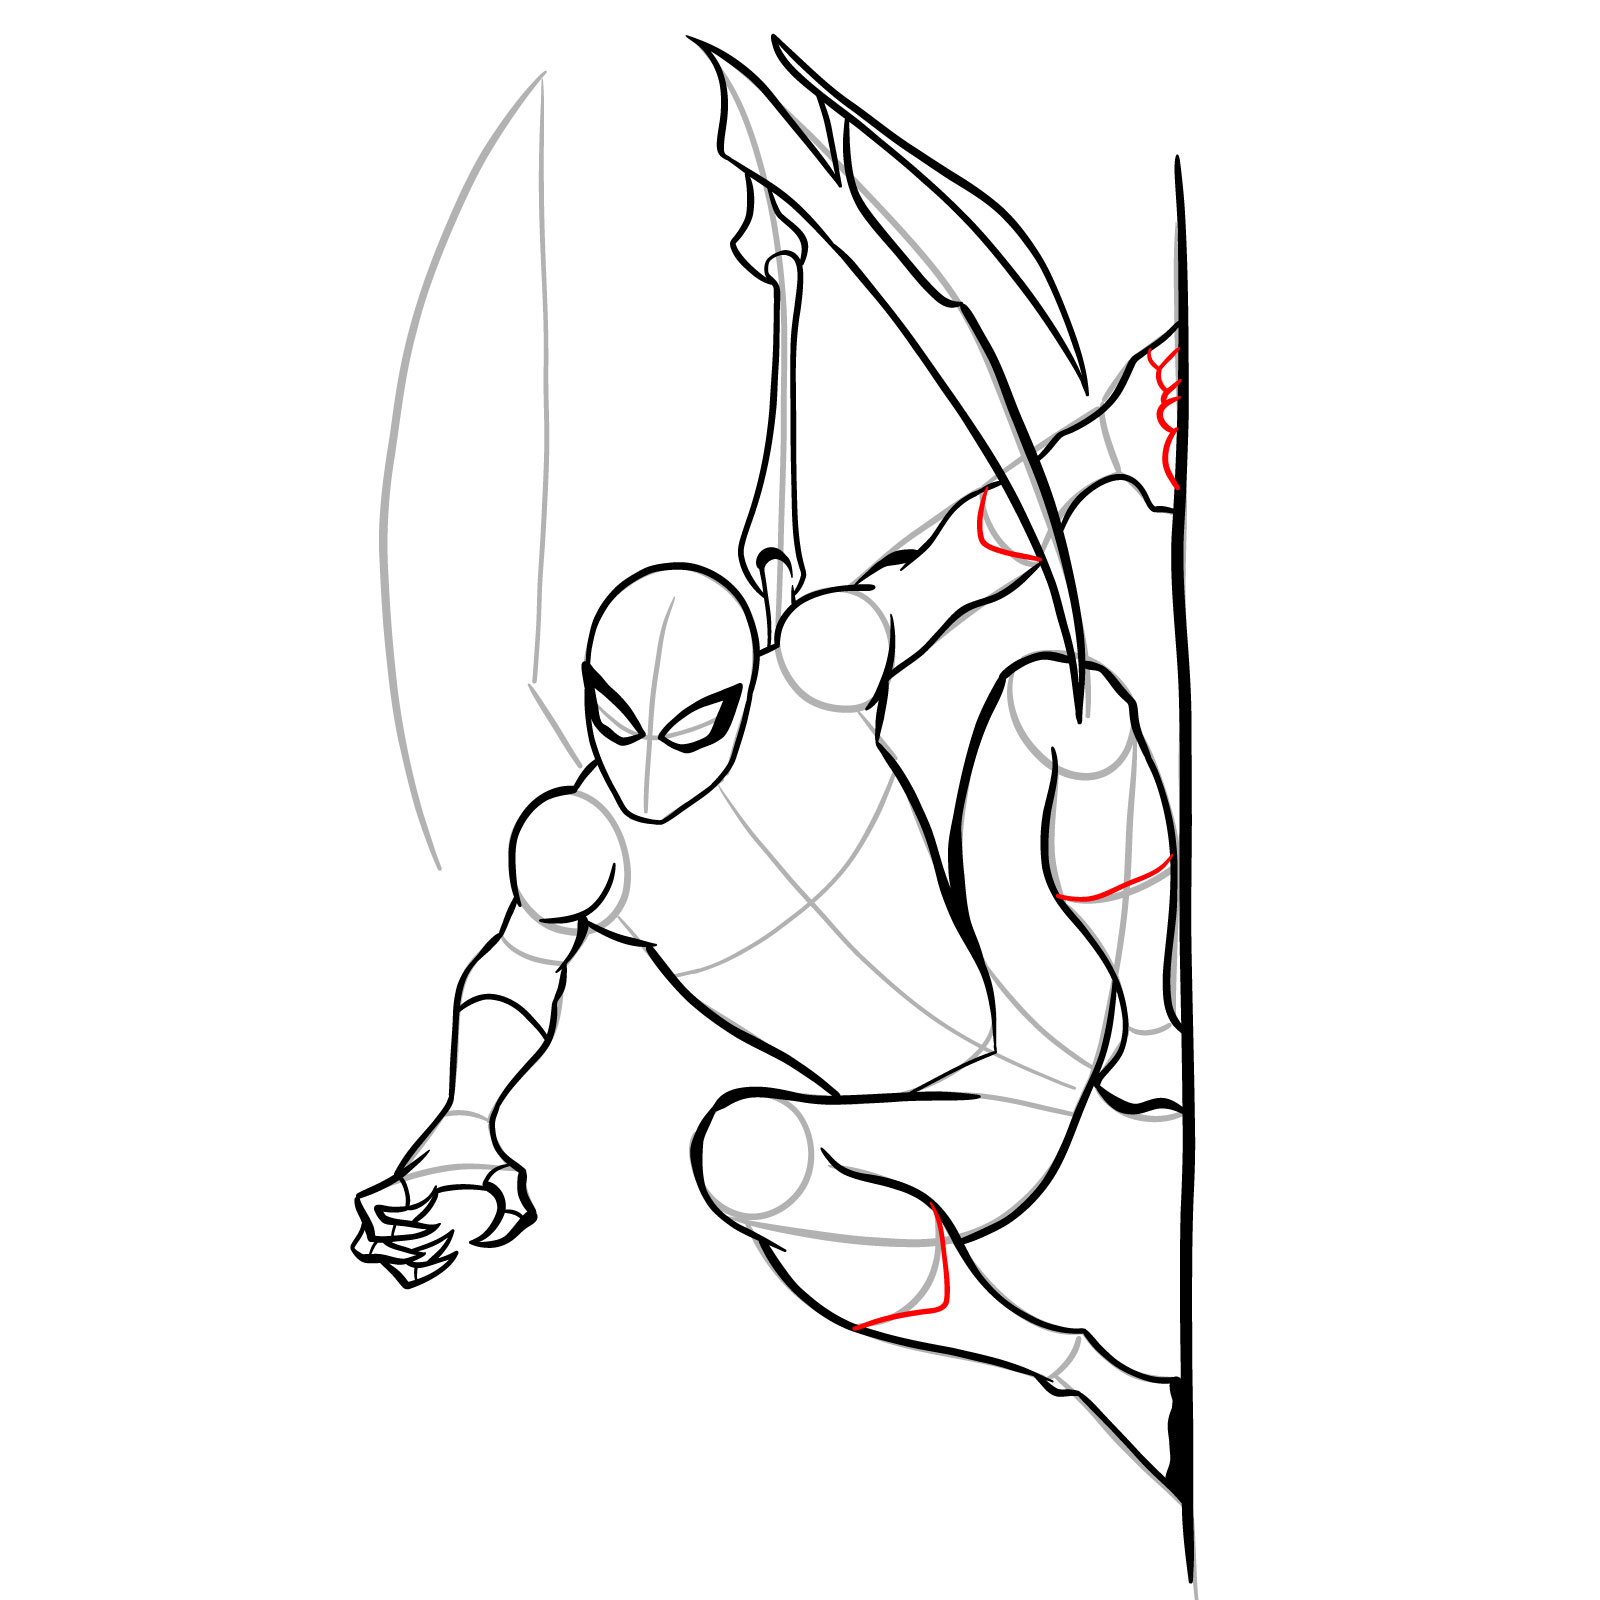 How to draw The Superior Spider-Man - step 27